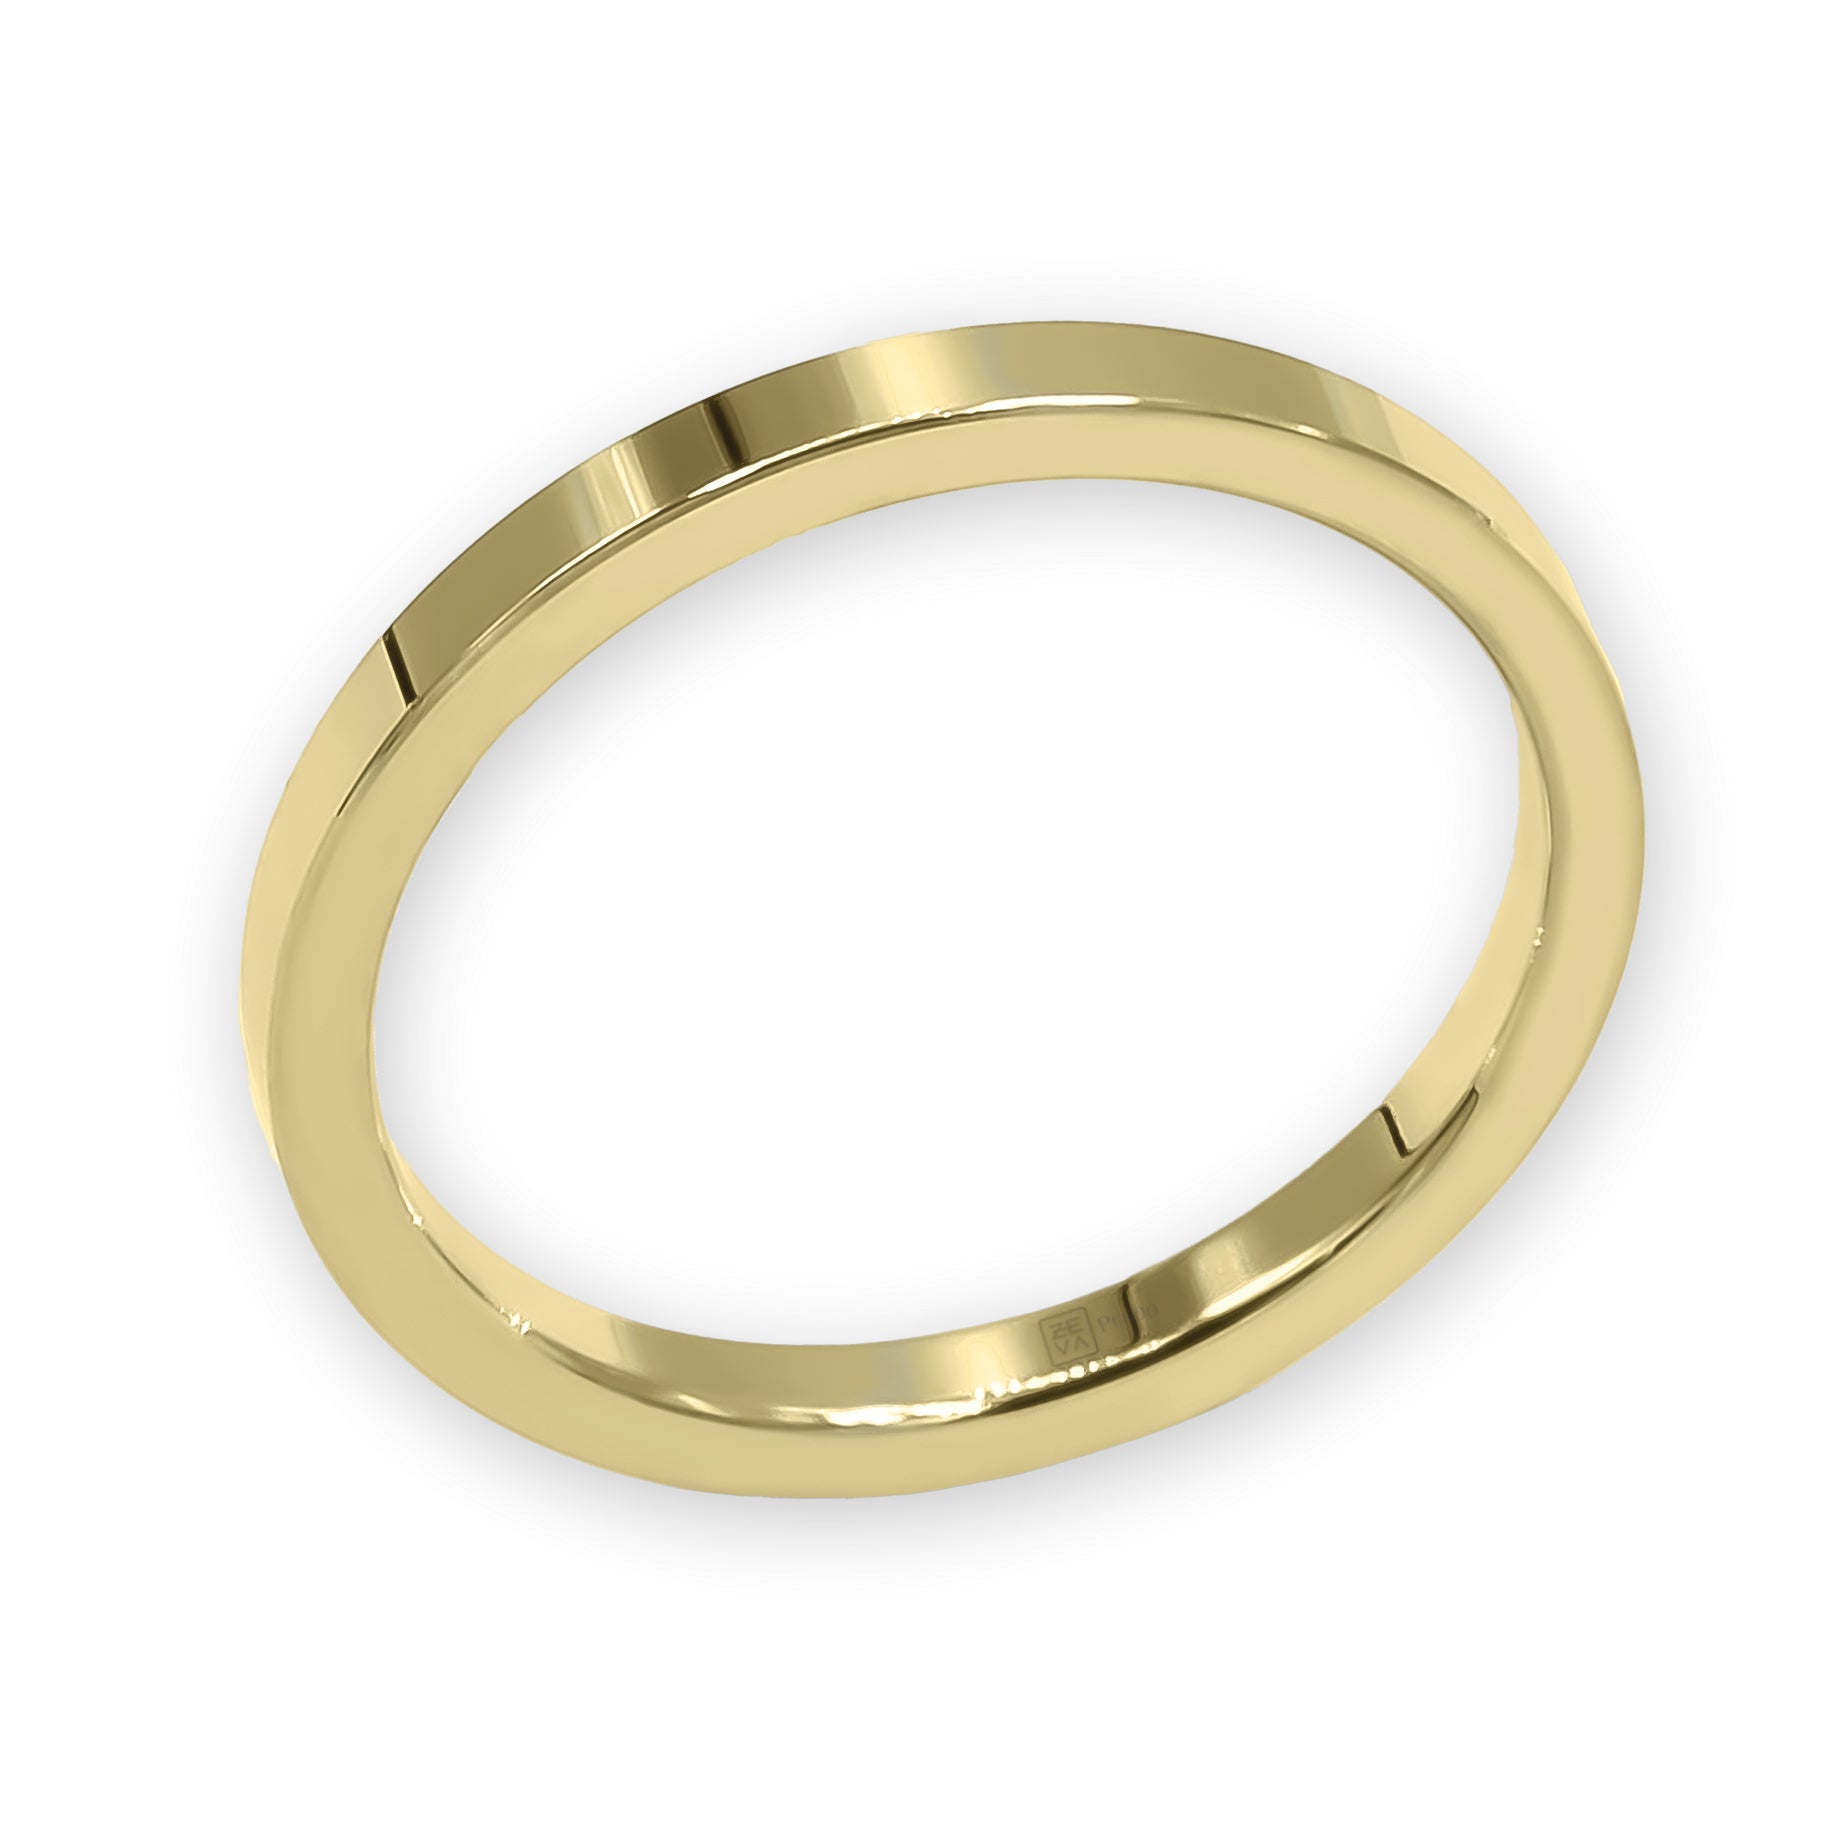 Ring EARTH IS ROUND 2mm flat profile yellow gold 18k